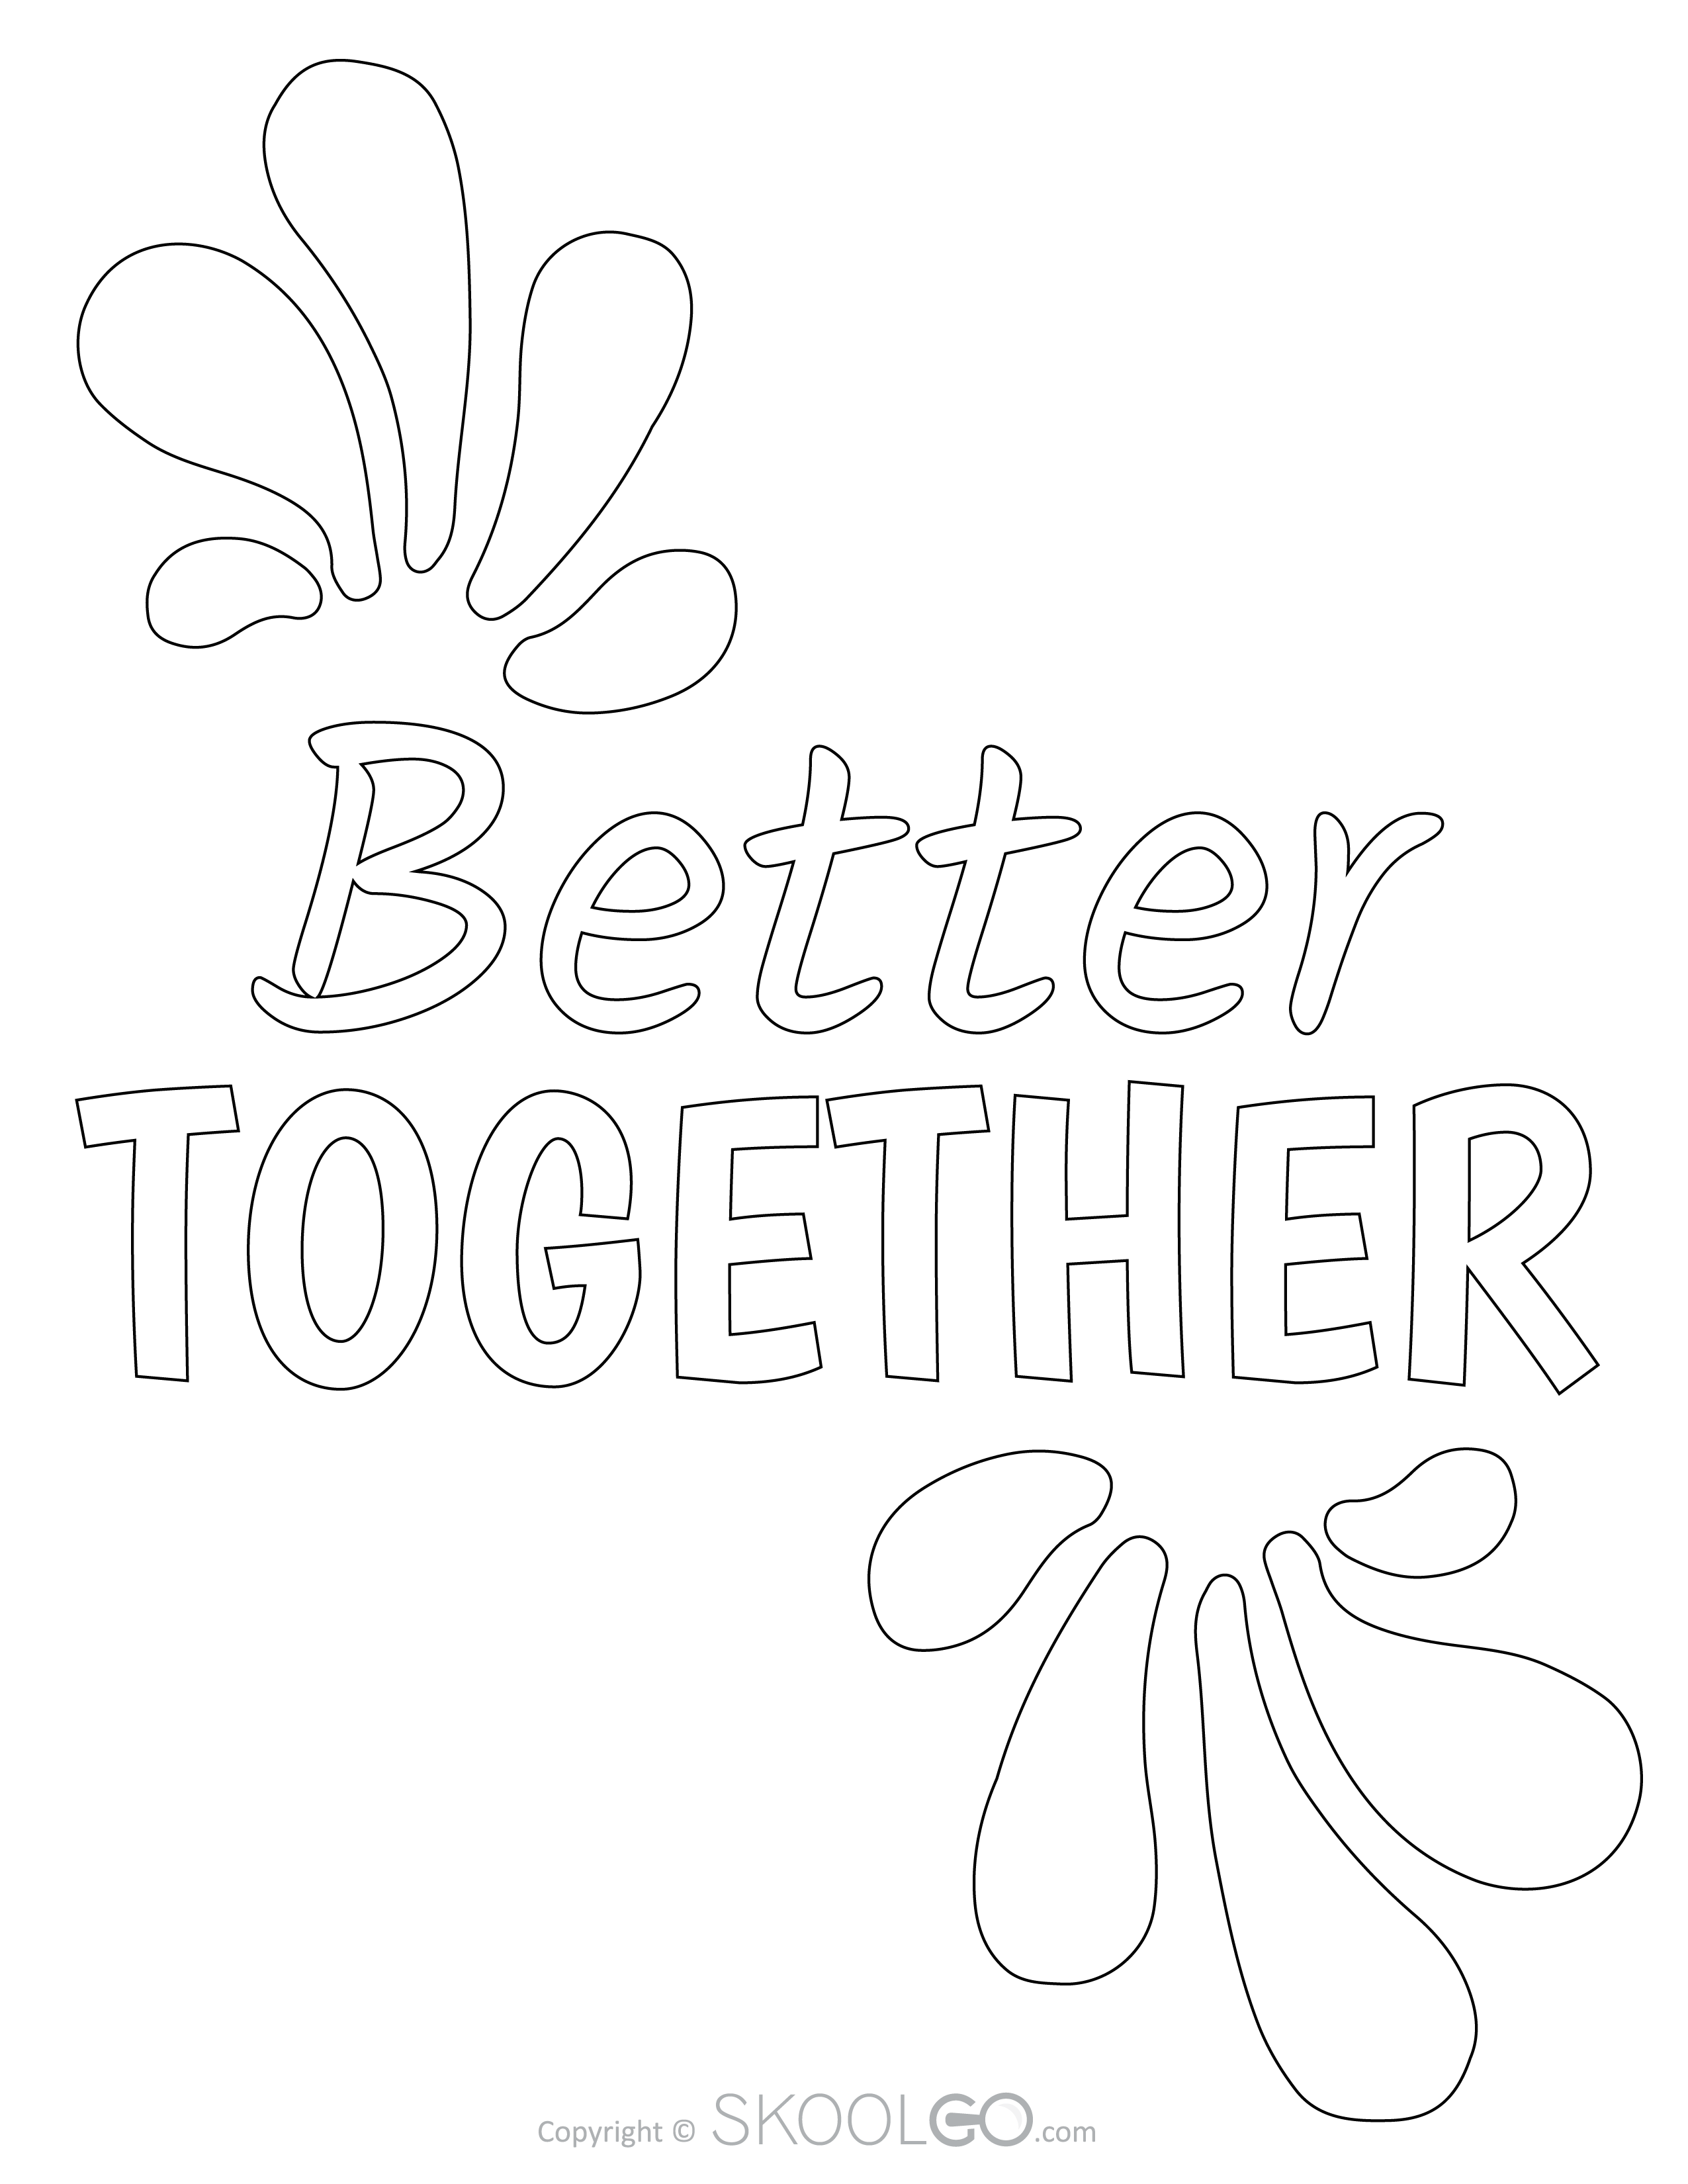 Better Together - Free Coloring Version Poster